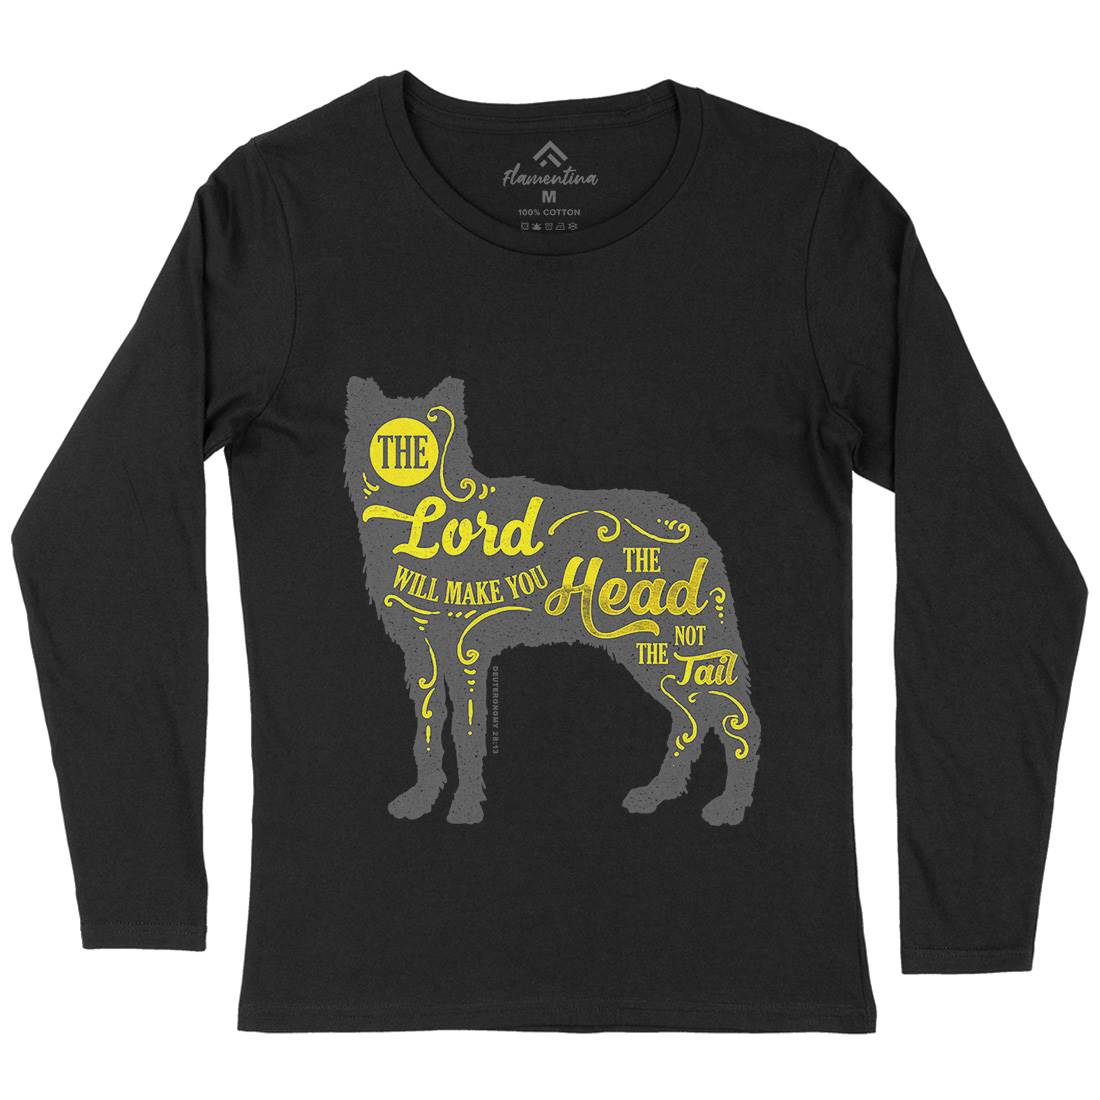 Head Not The Tail Womens Long Sleeve T-Shirt Religion A326